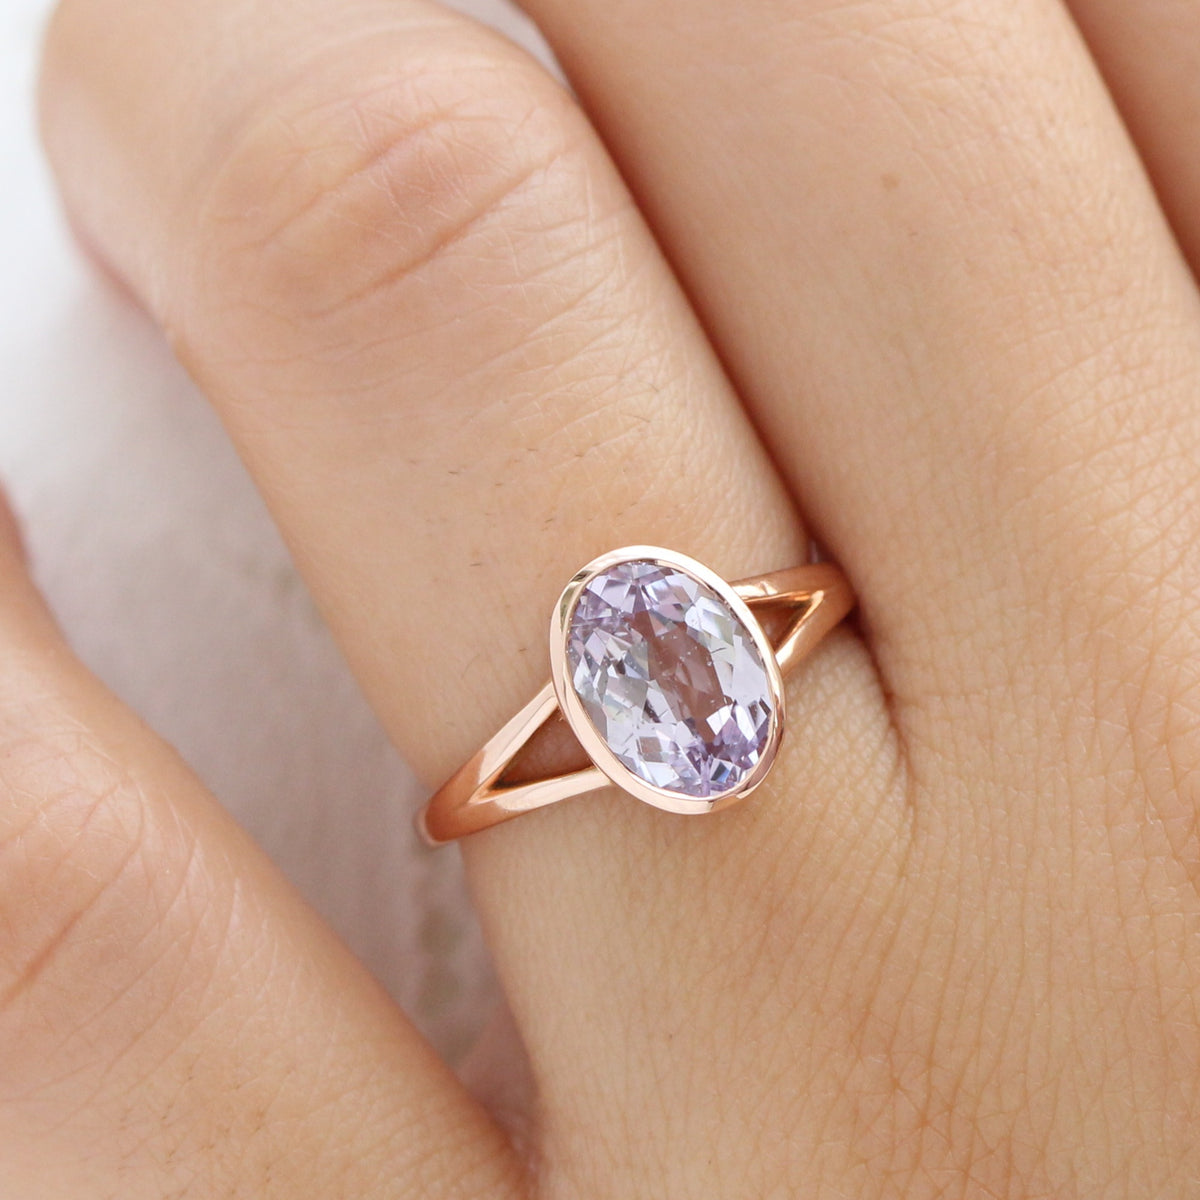 Oval lavender sapphire ring rose gold bezel sapphire ring la more design jewelry